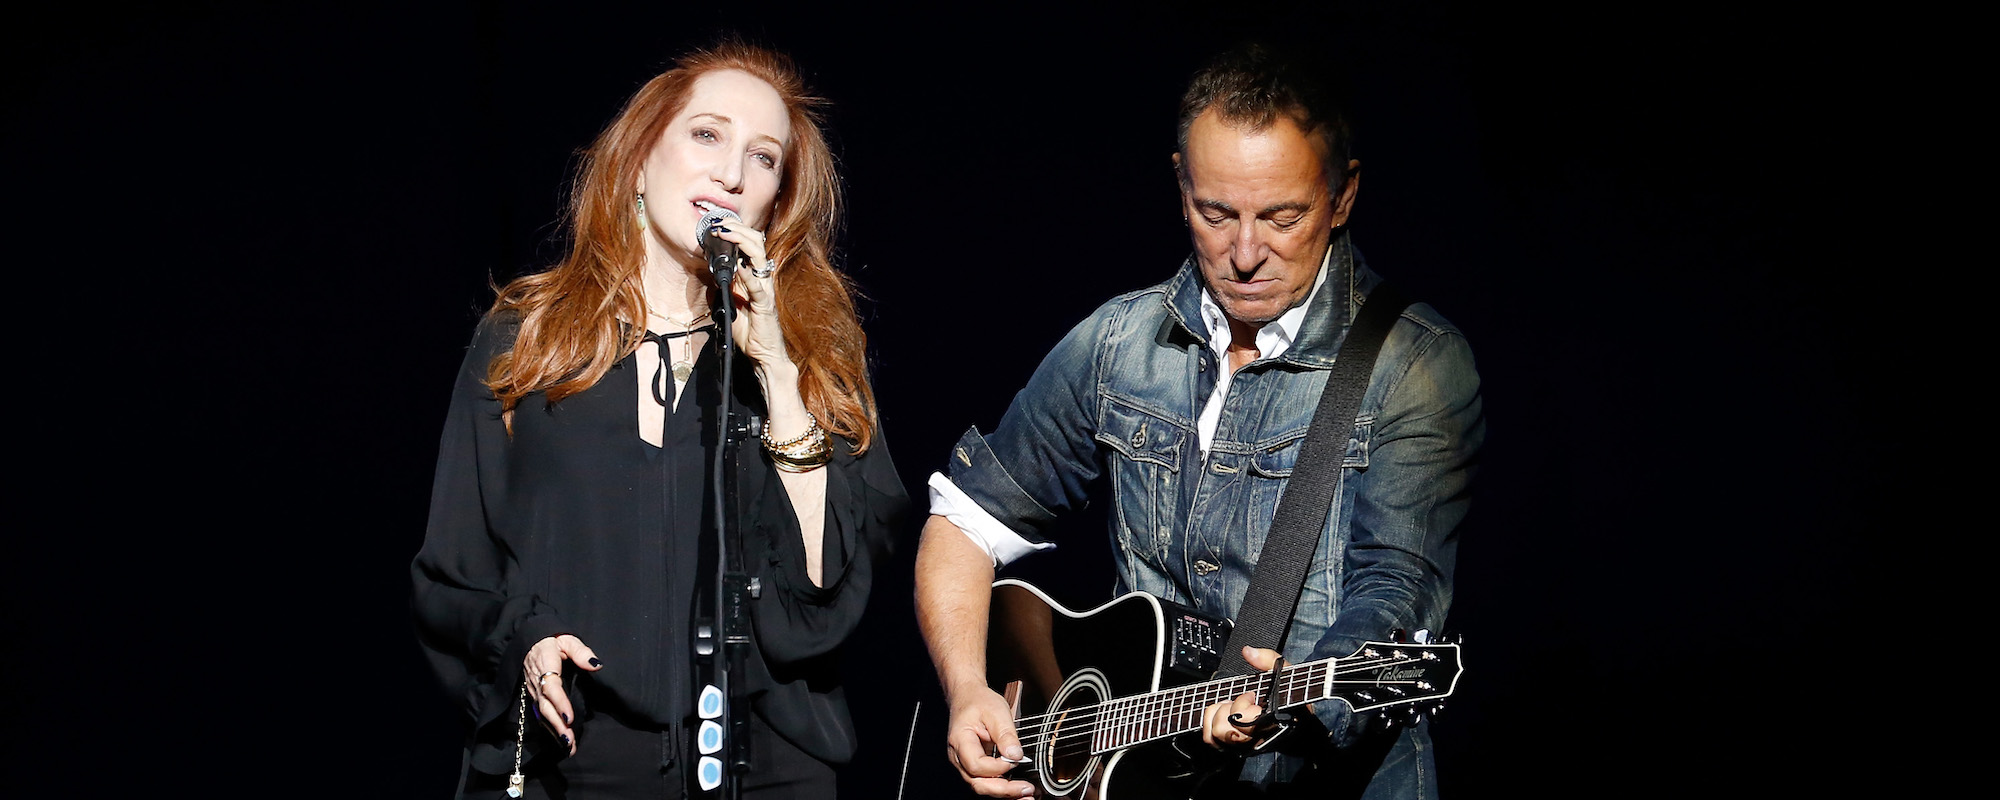 The Meaning Behind Bruce Springsteen and Patti Scialfa’s End Credit Song “Addicted to Romance”